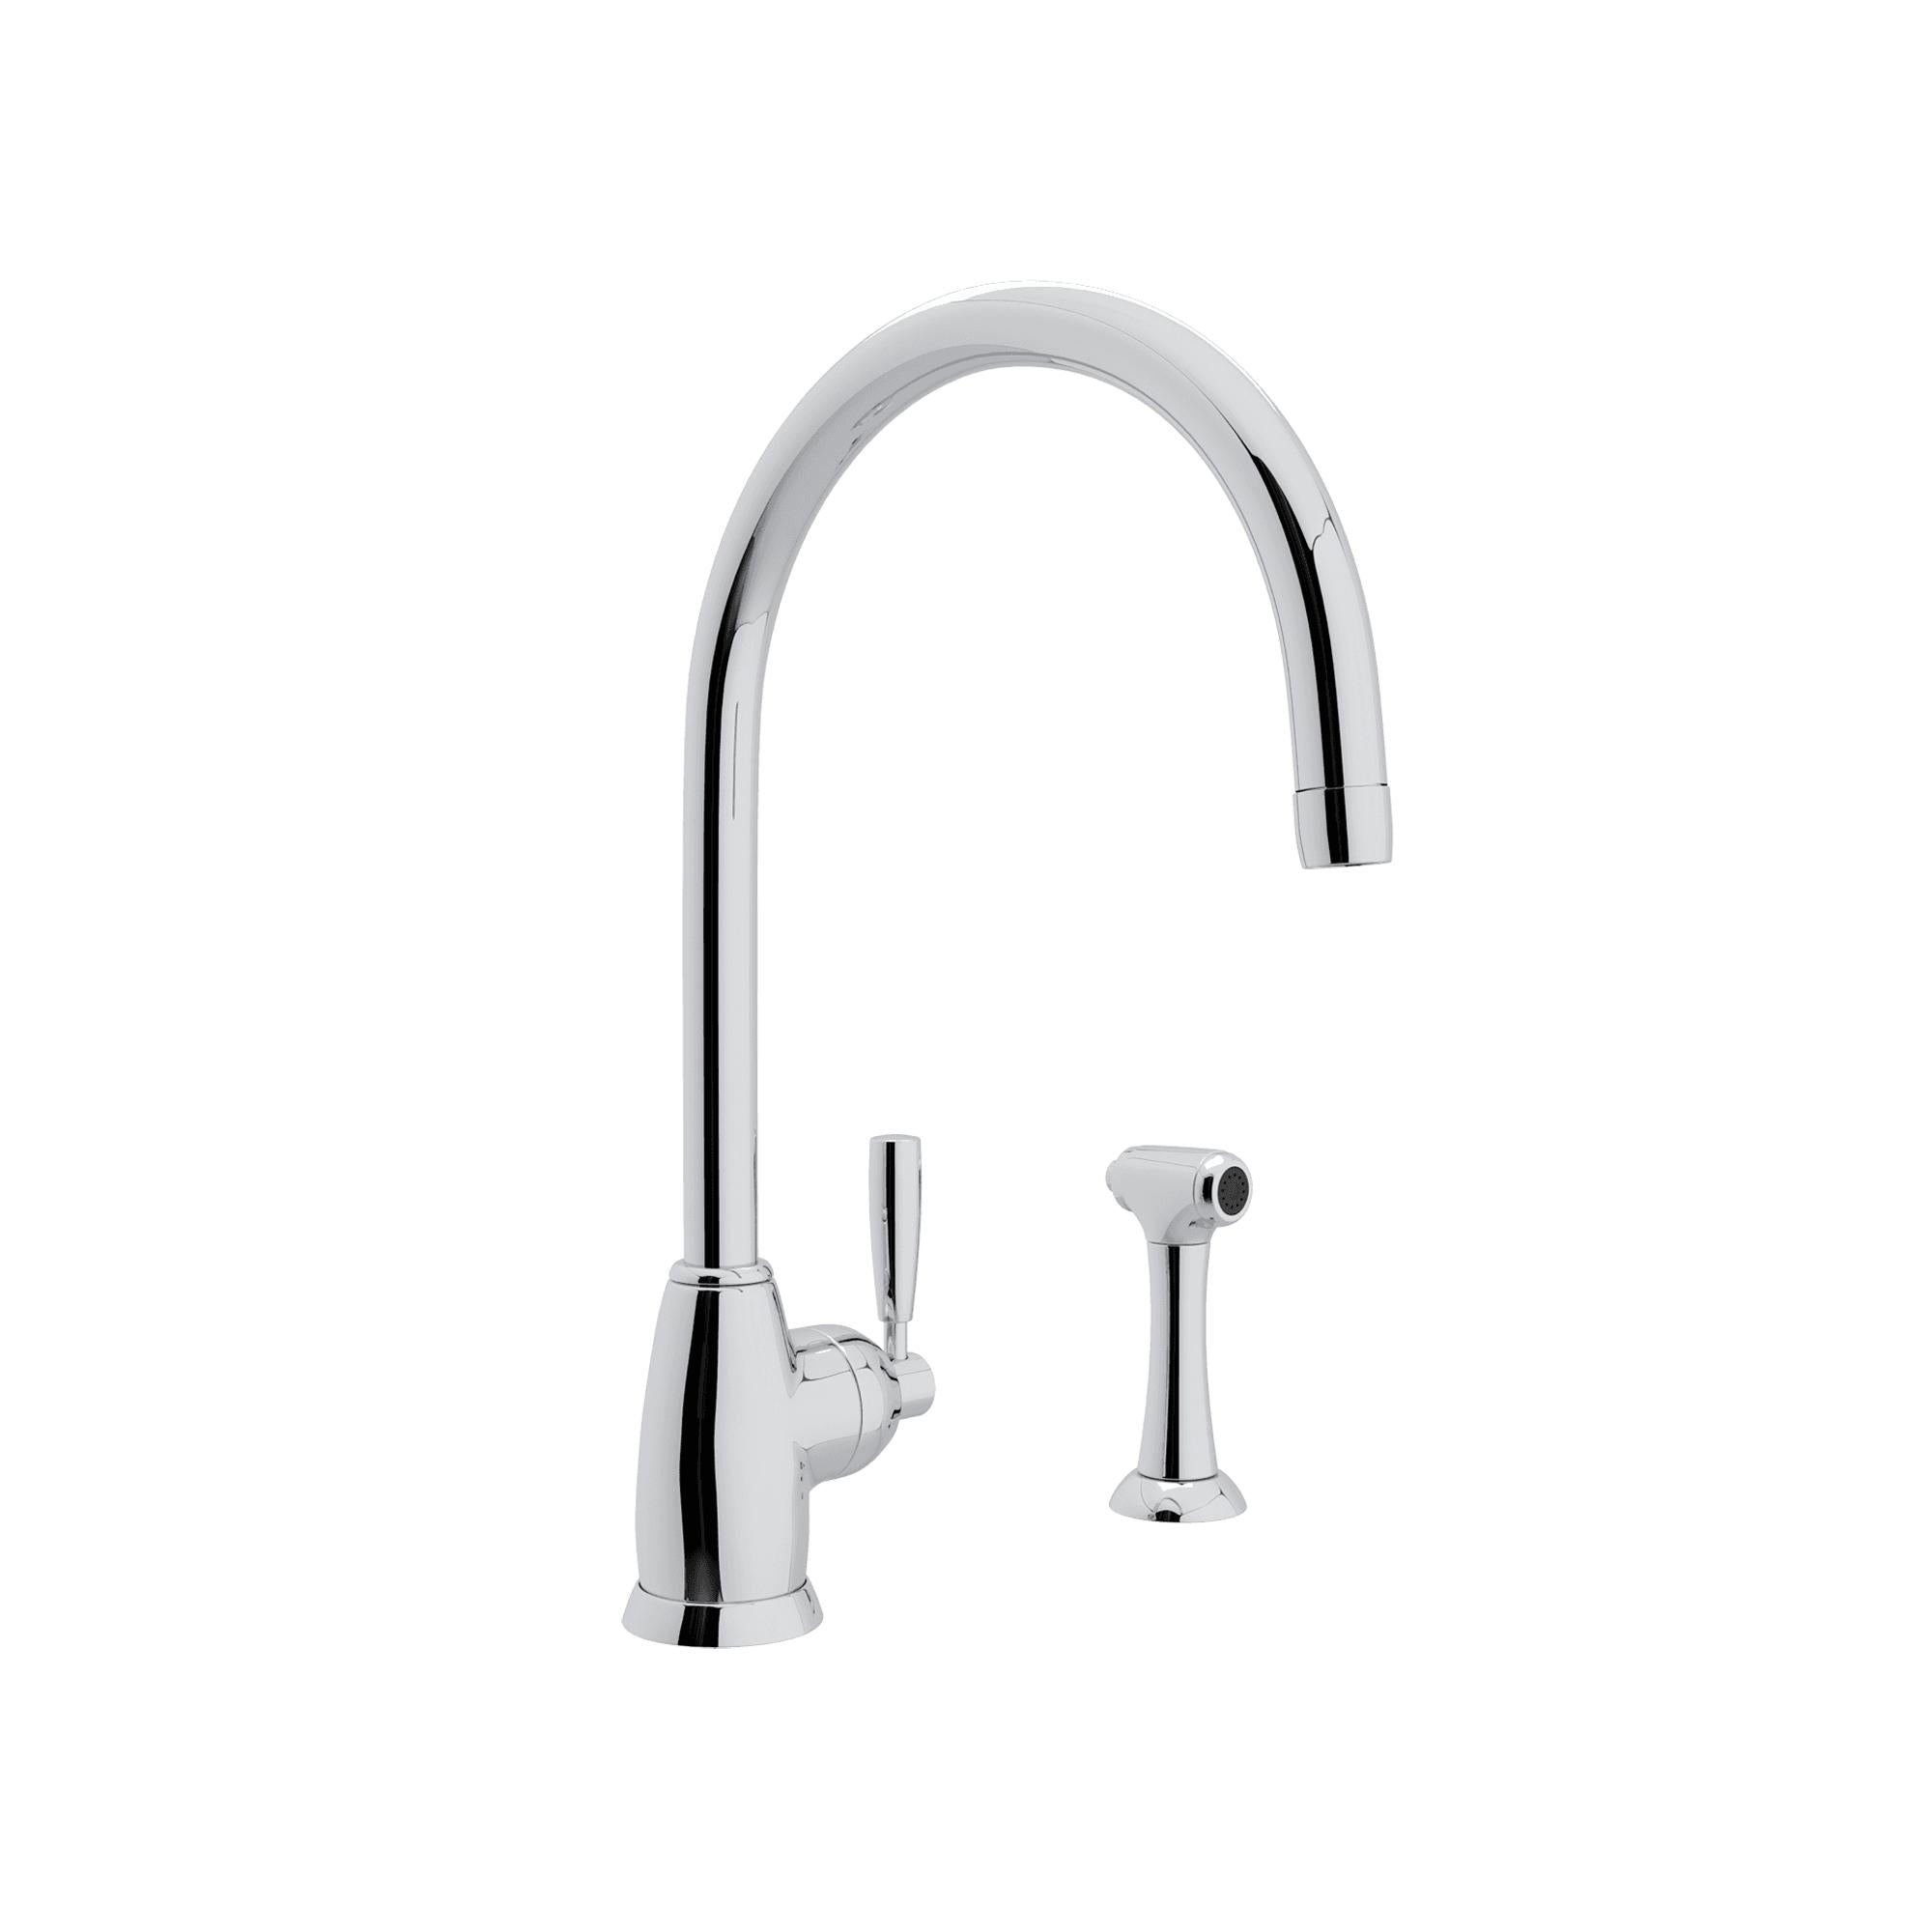 Perrin & Rowe U.4846 Holborn Kitchen Faucet With Side Spray